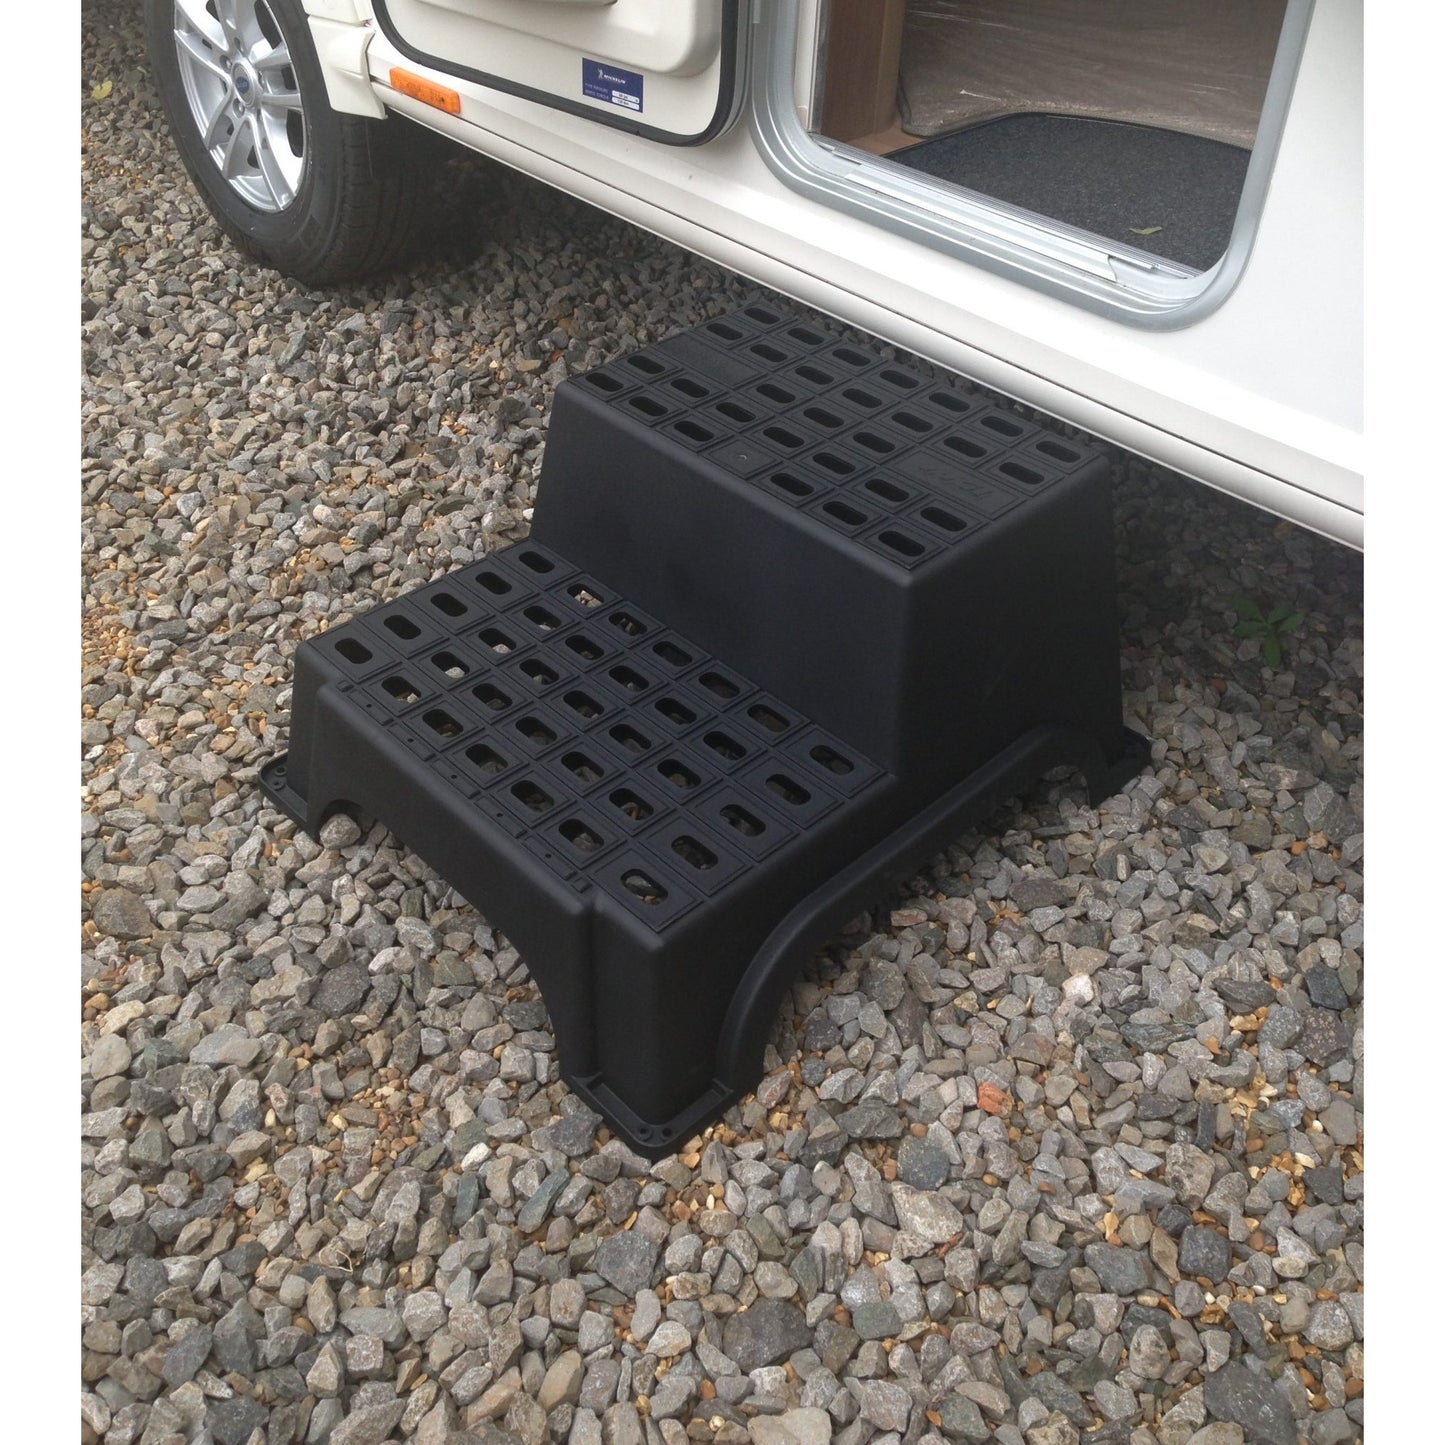 MGI Milenco Giant Double Plastic Step - AVAILABLE IN STORE ONLY